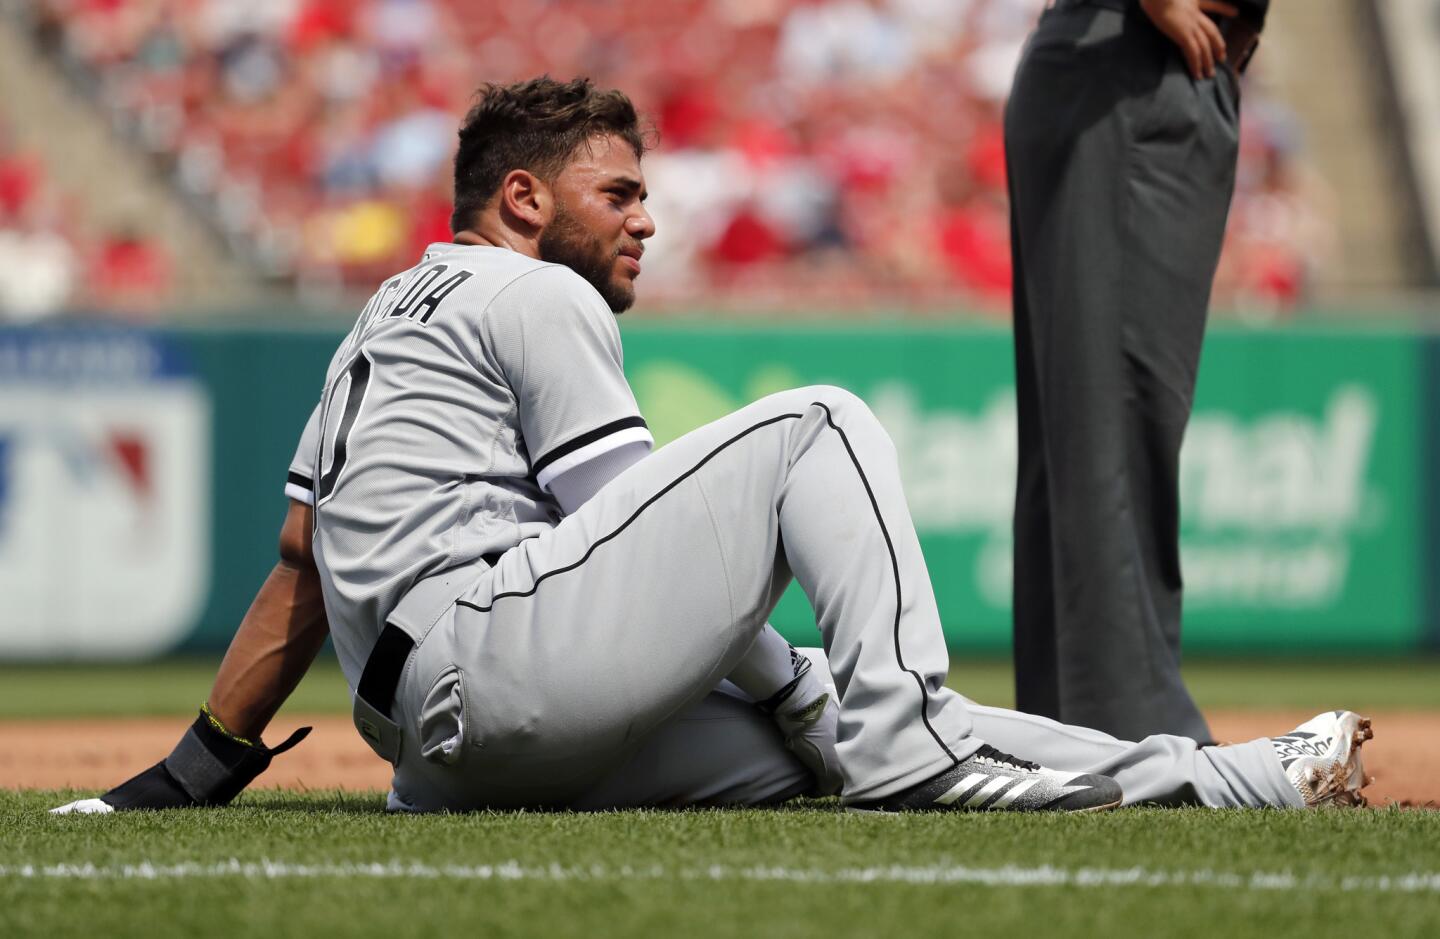 The White Sox's Yoan Moncada holds his leg after sliding into third during the eighth inning against the Cardinals, Wednesday, May 2, 2018, in St. Louis. Moncada left the game and the Cardinals went on to win 3-2.